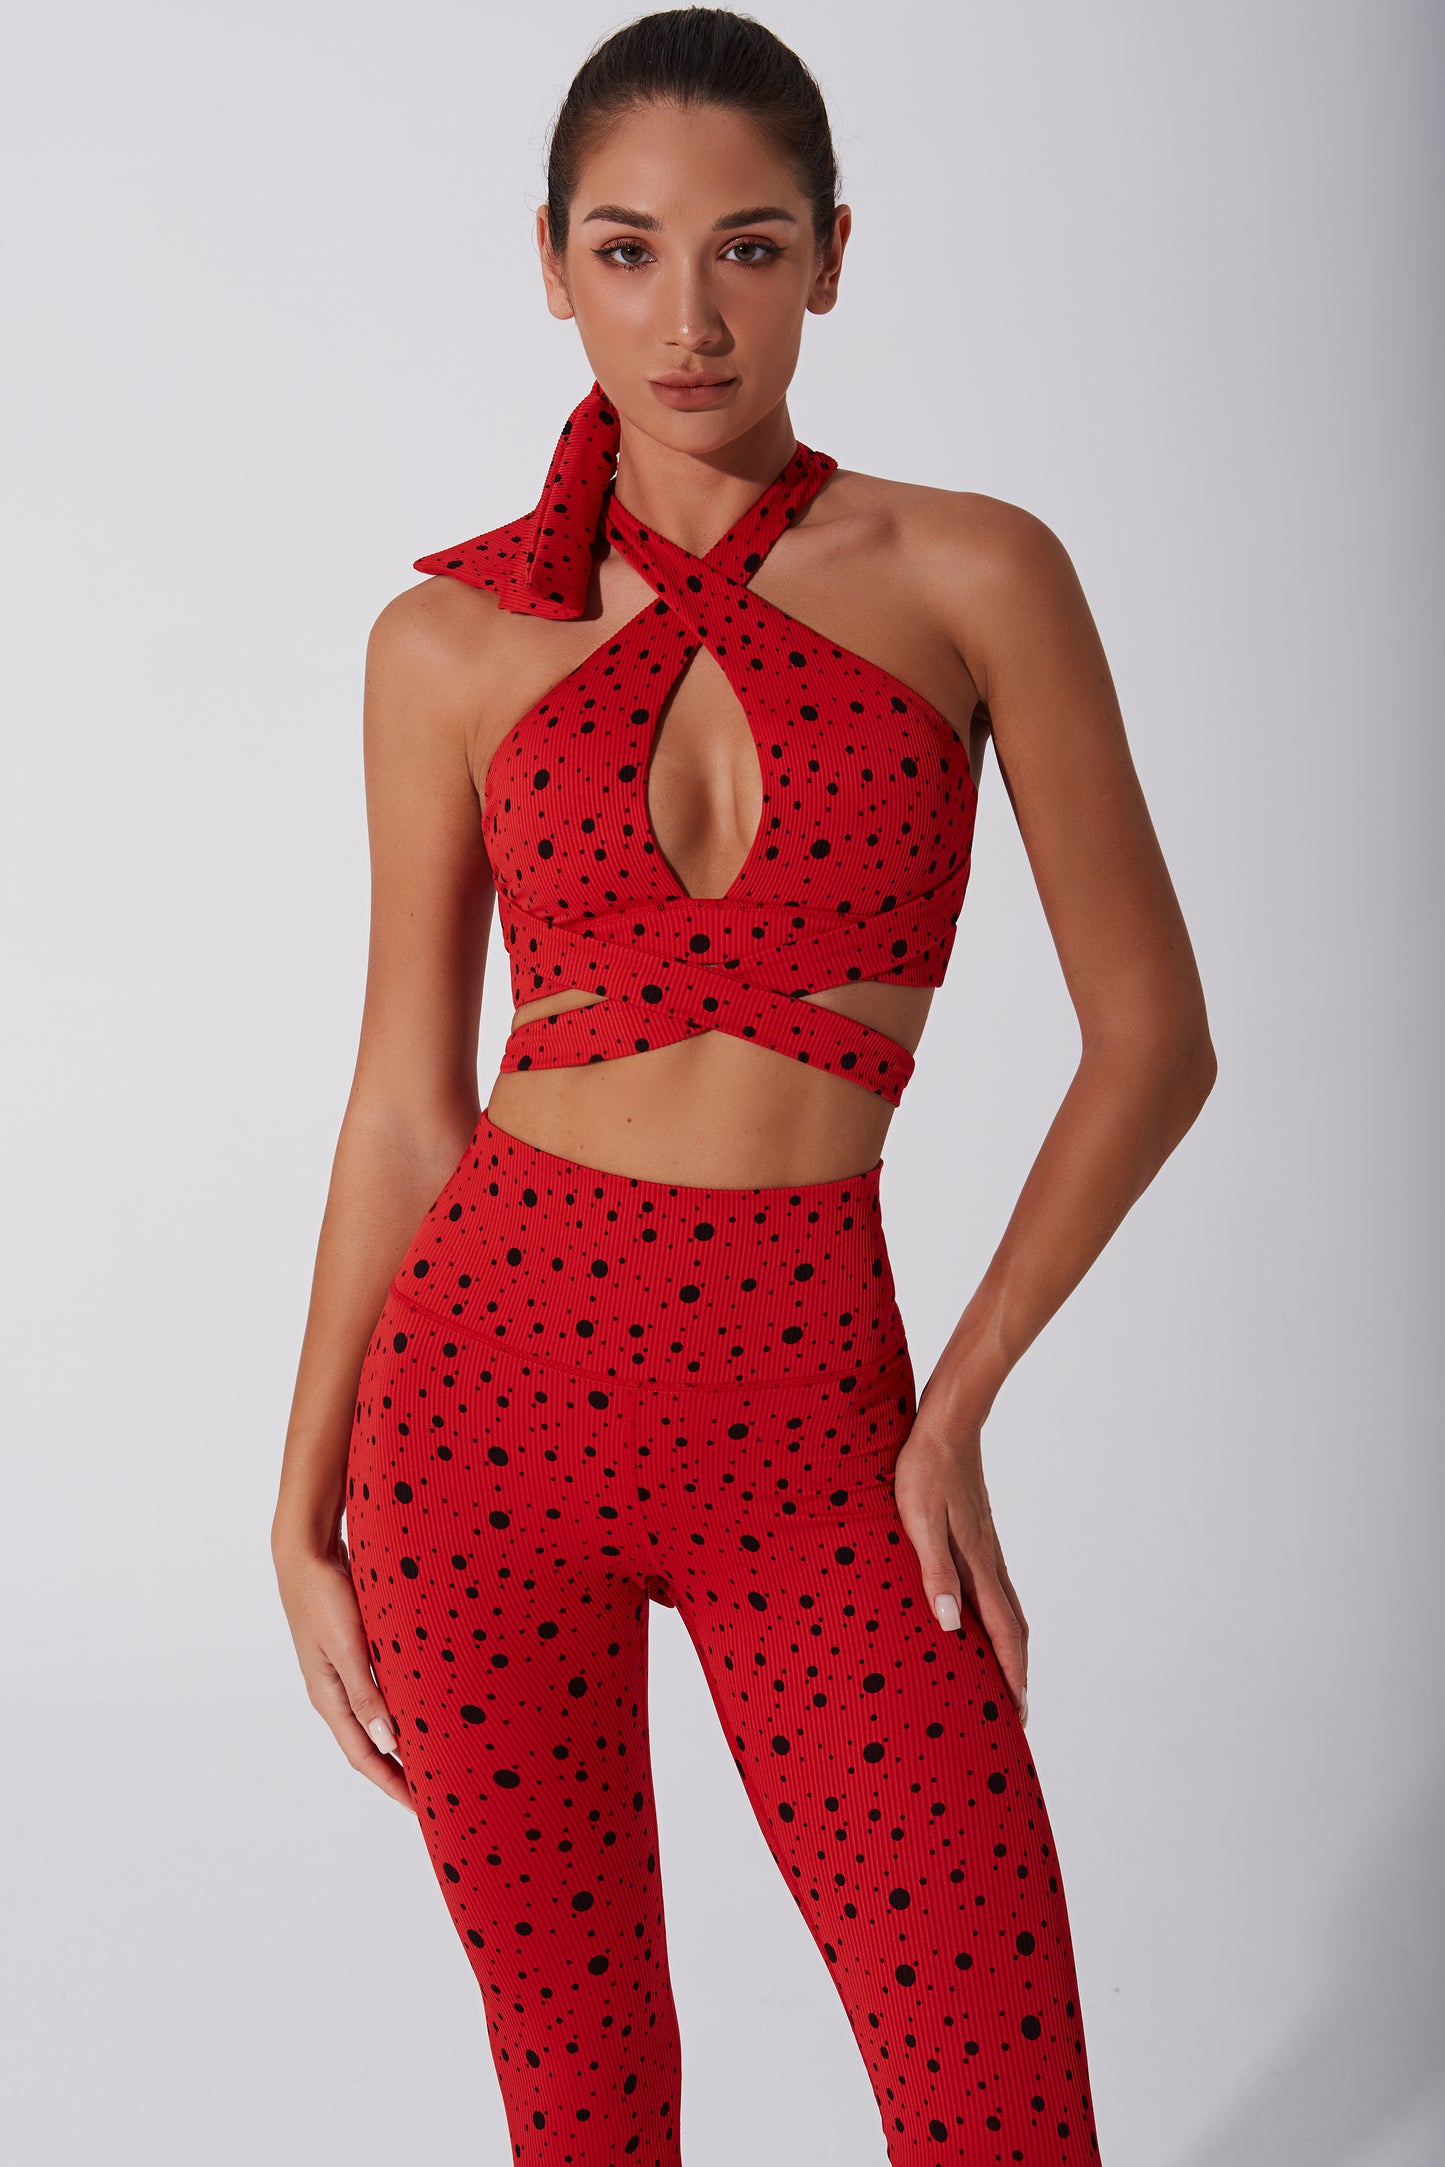 Vibrant RED polka dots bra for women, a stylish choice for a trendy look.